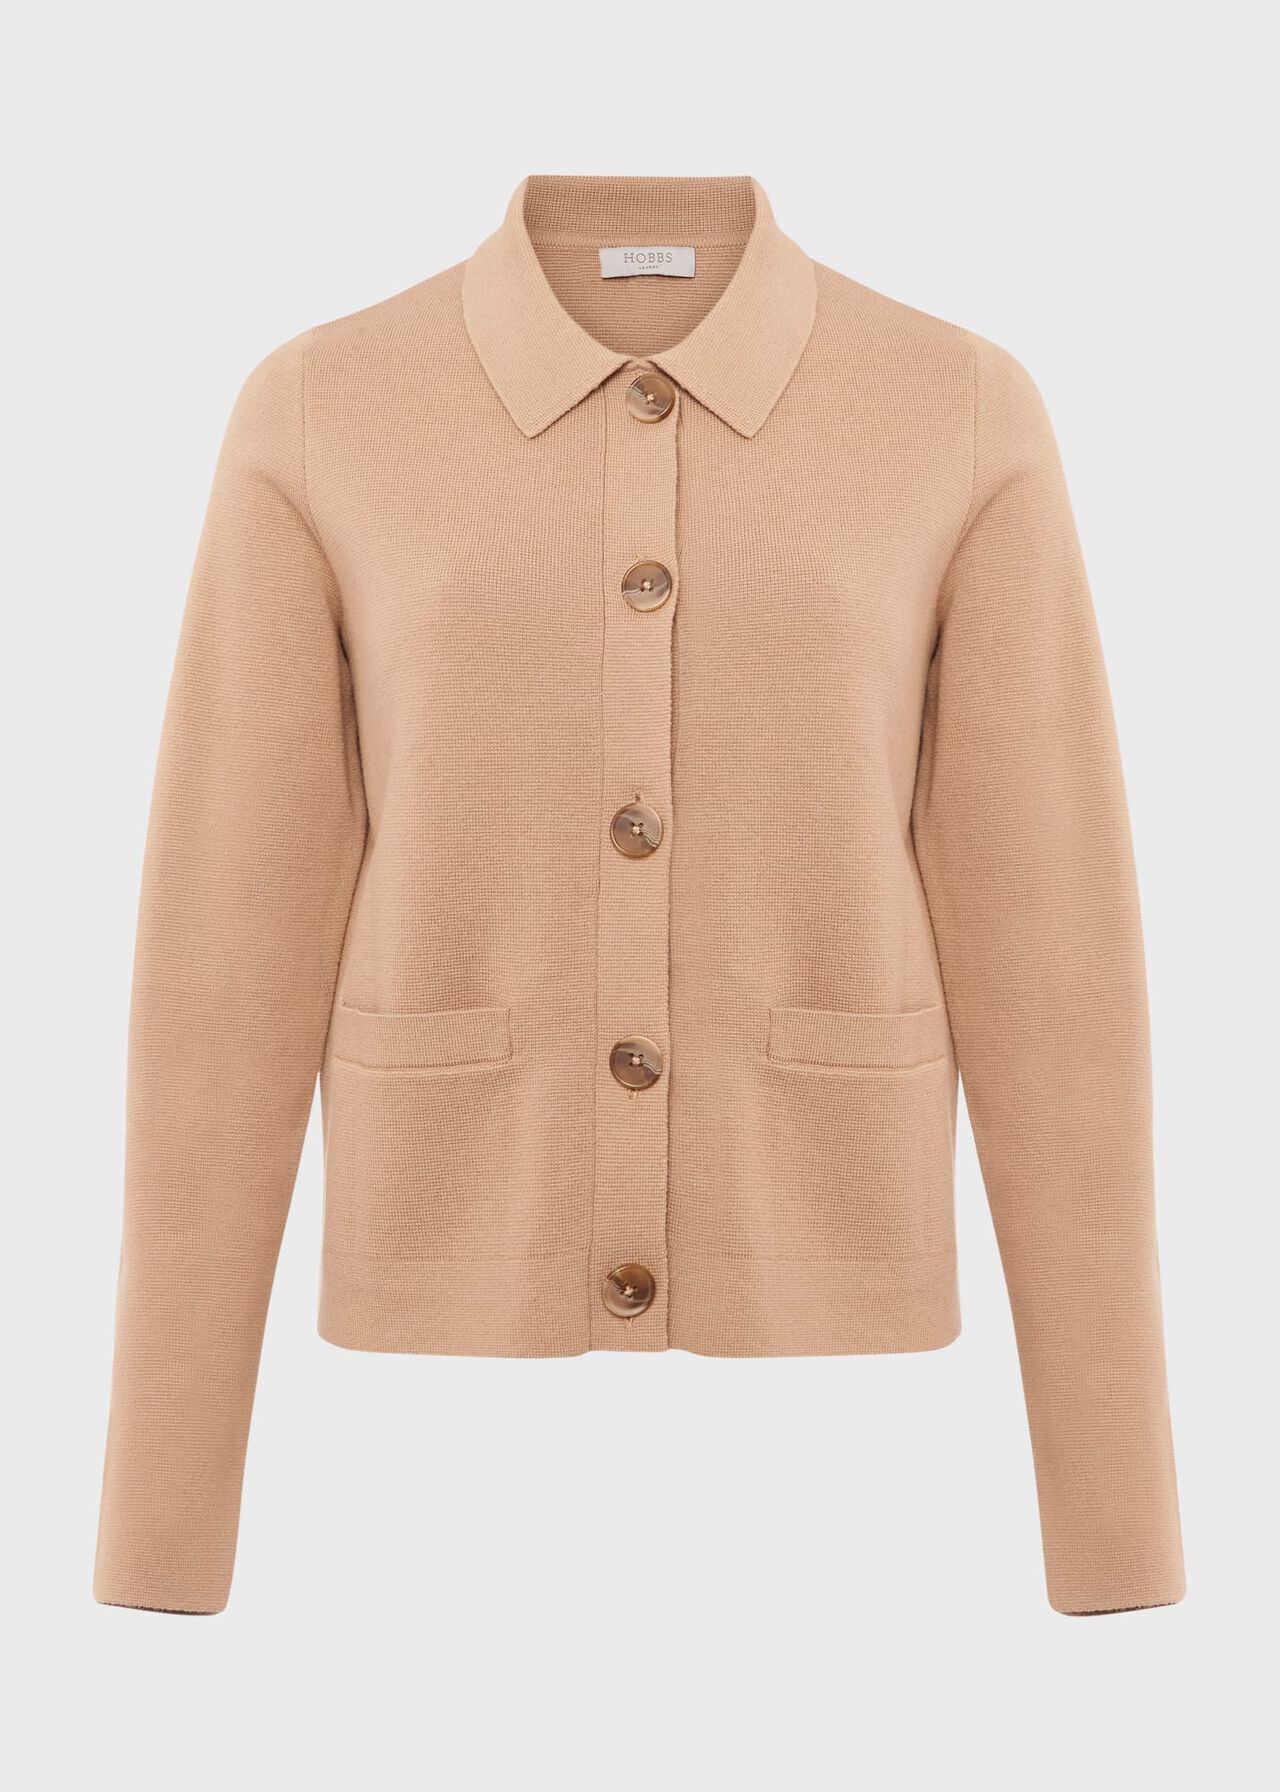 Mia Cotton Wool Knitted Jumper, Hobbs Camel, hi-res